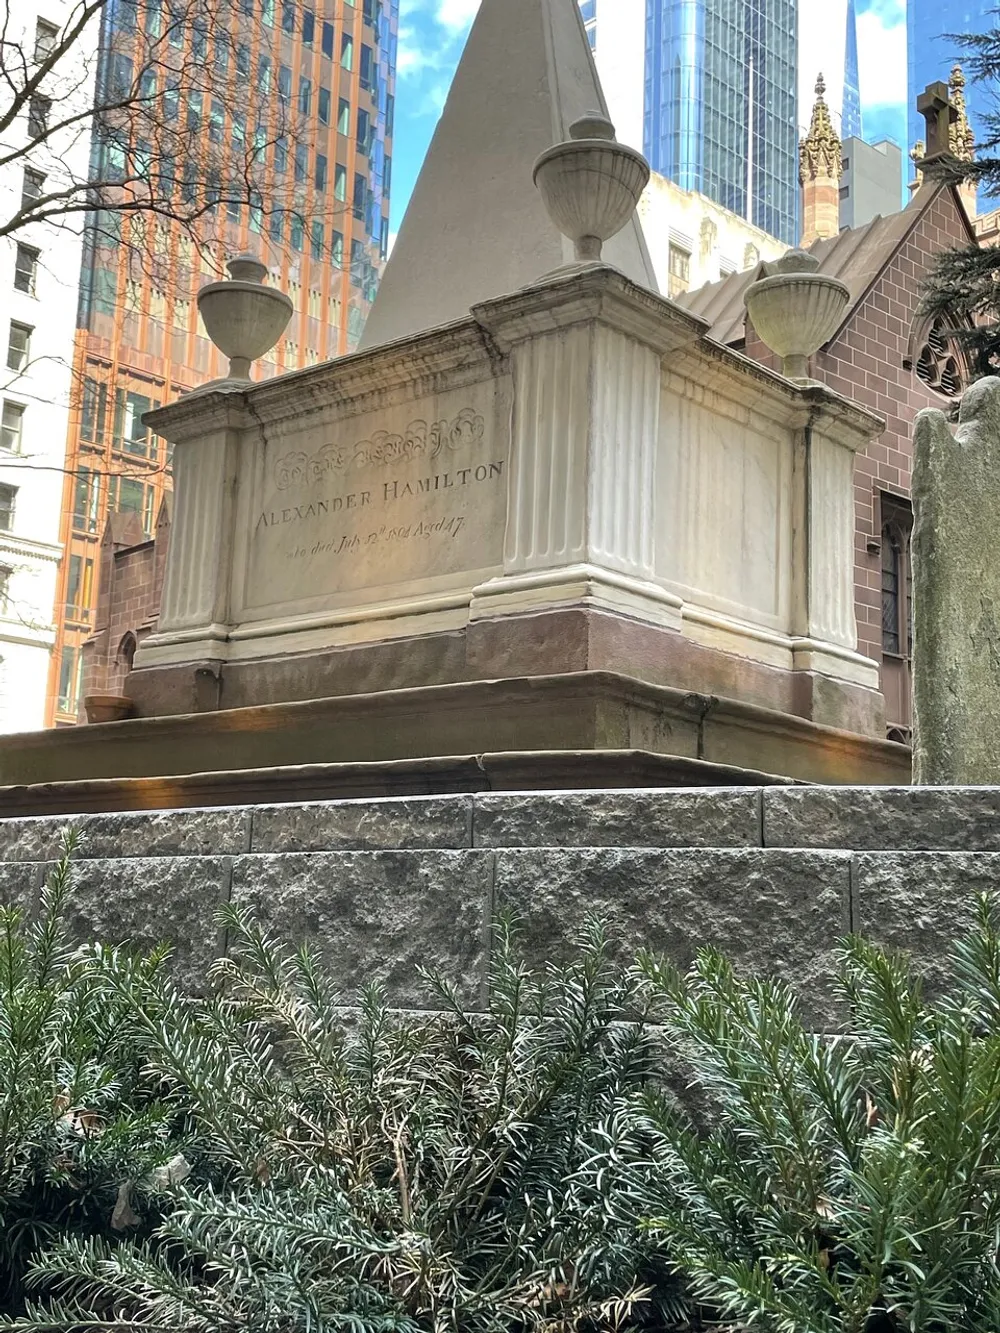 This image features the grave of Alexander Hamilton marked by a neoclassical monument surrounded by greenery with modern skyscrapers in the background highlighting a juxtaposition between historical legacy and contemporary urban environment